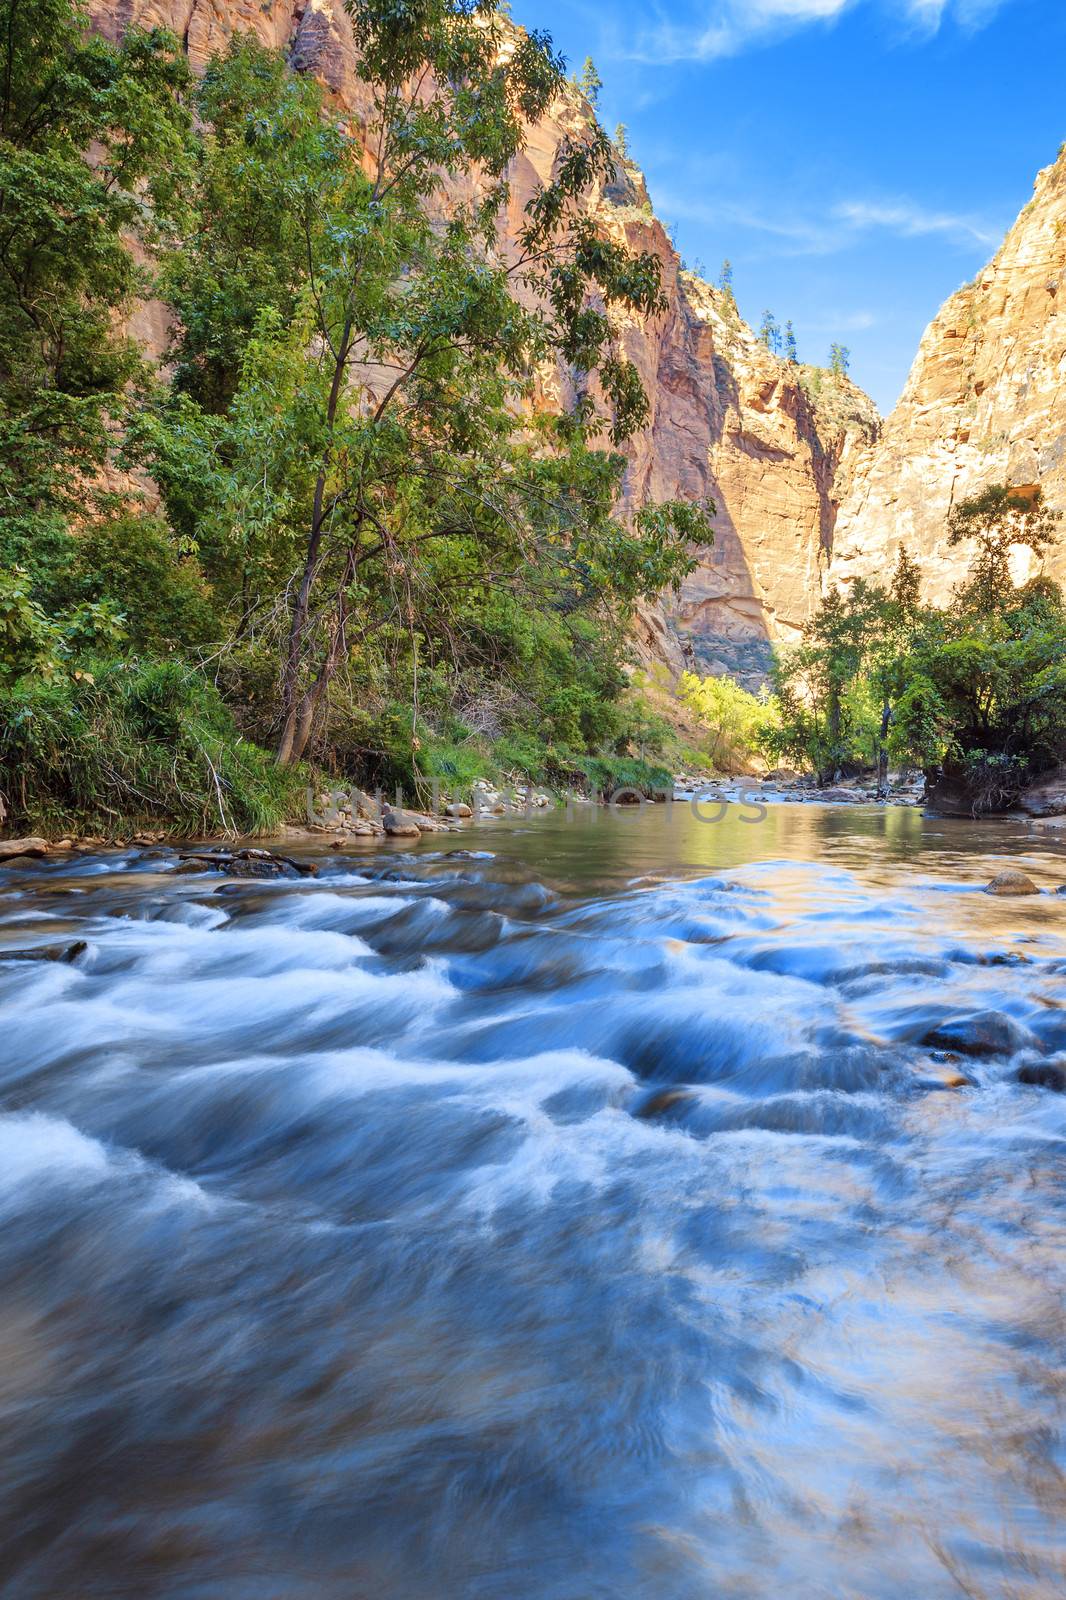 Shallow rapids of the Virgin River Narrows in Zion National Park - Utah 